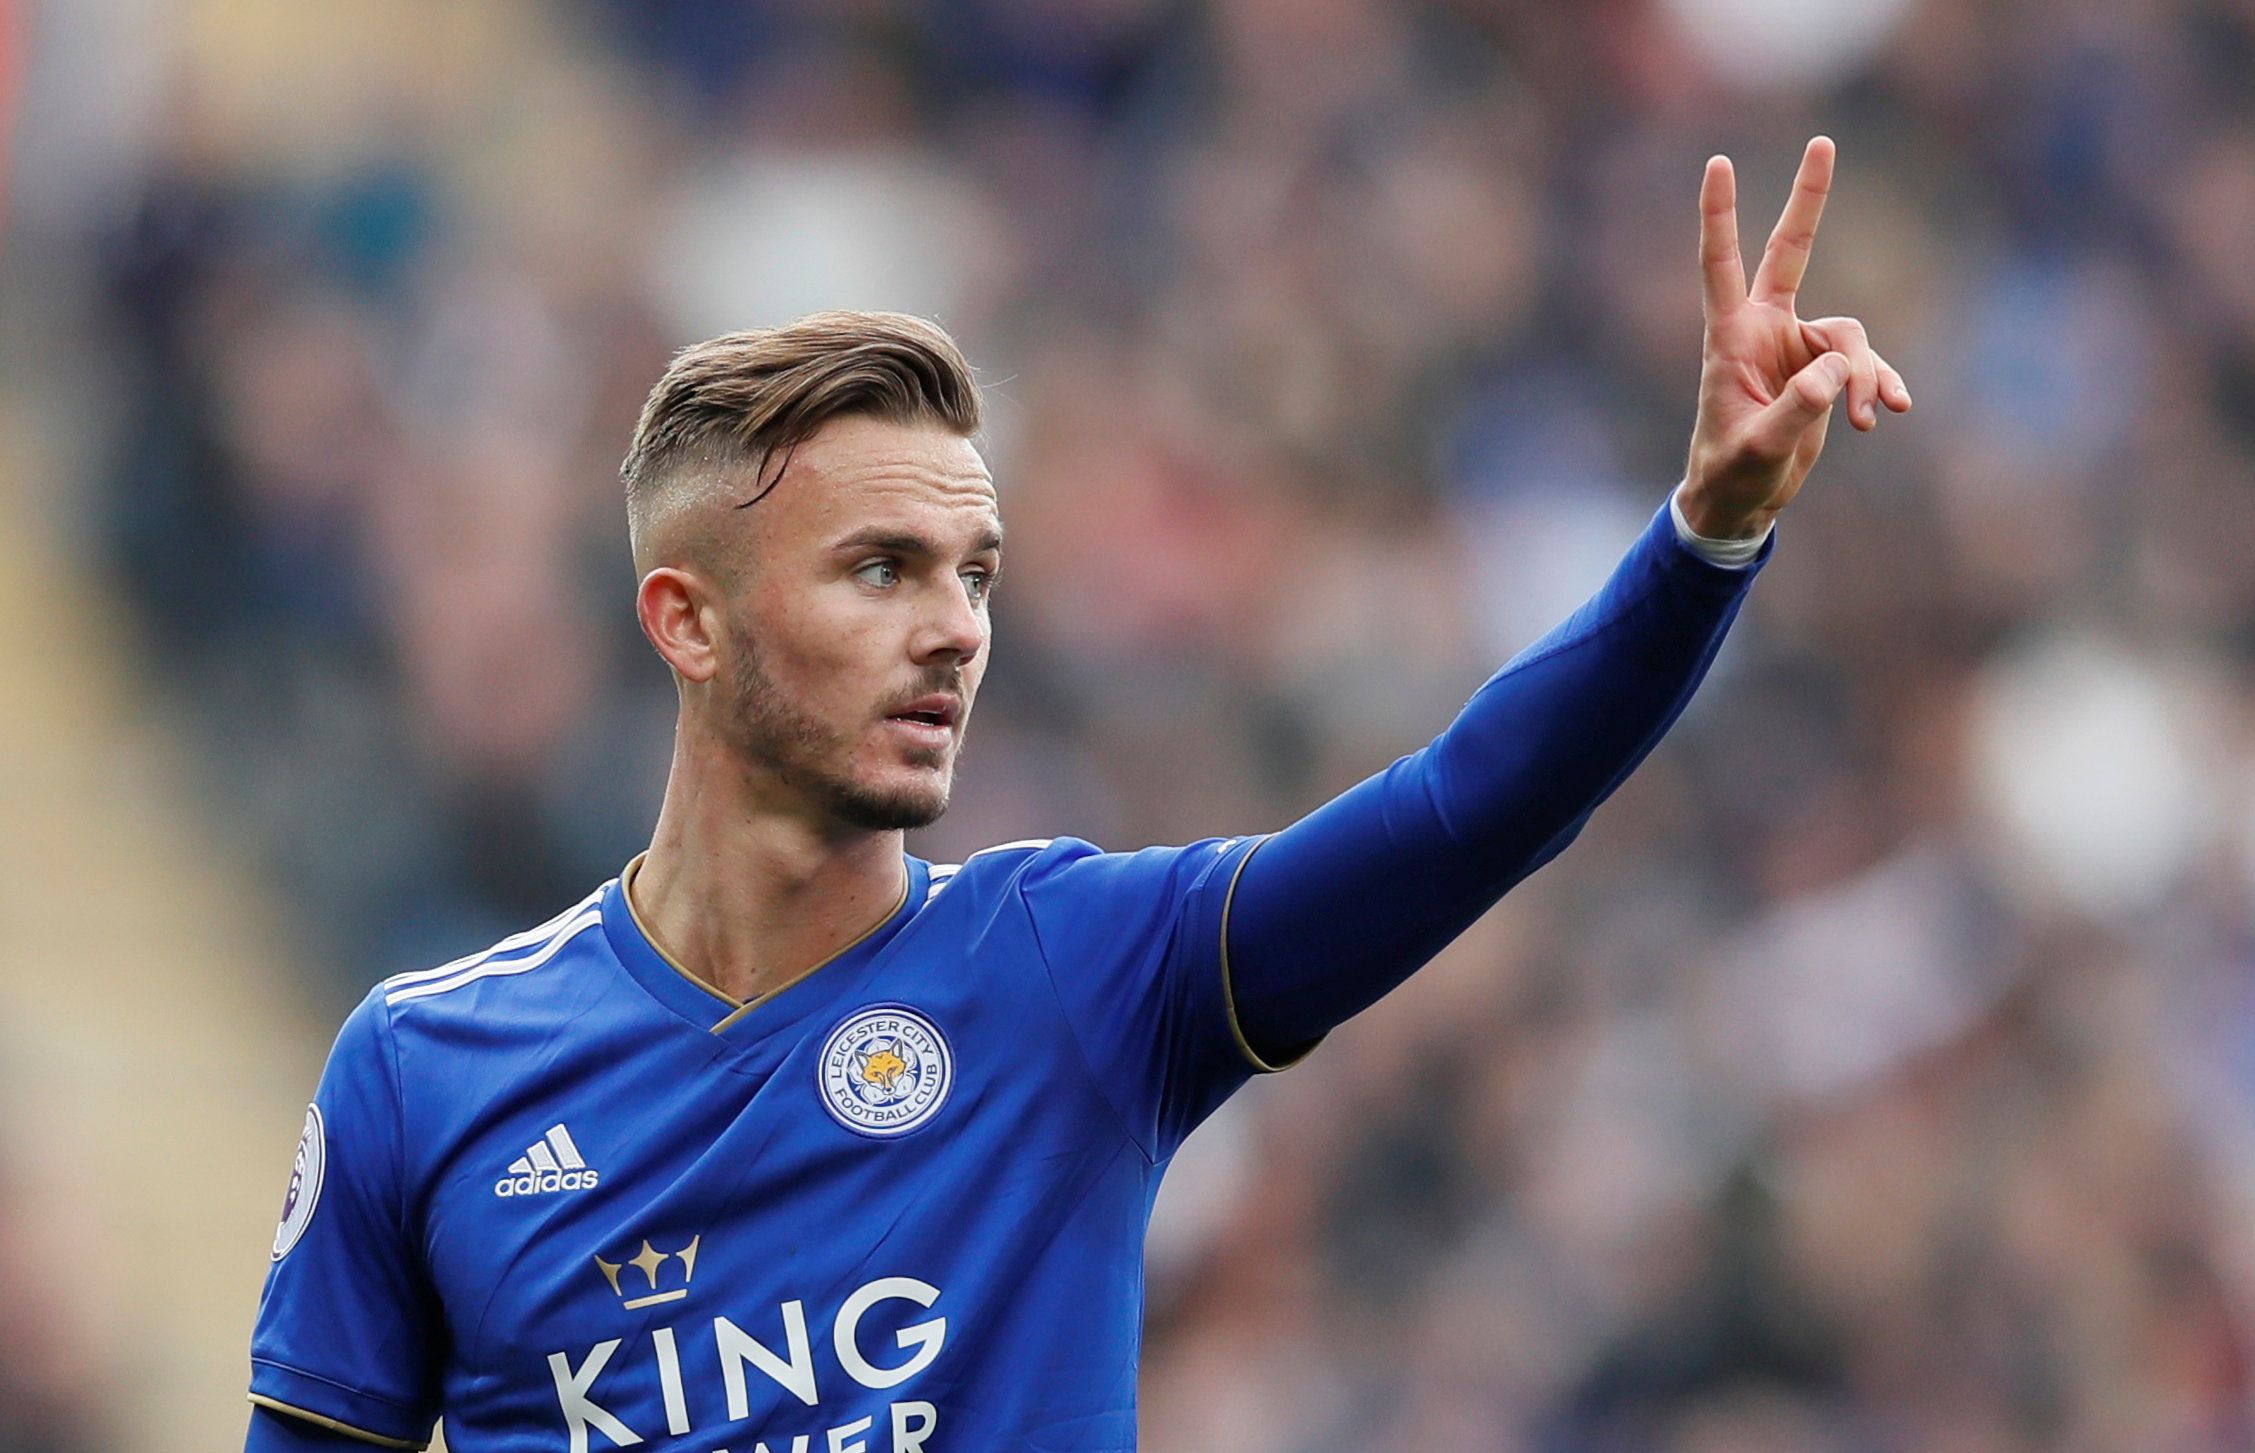 Soccer Football - Premier League - Leicester City v Arsenal - King Power Stadium, Leicester, Britain - April 28, 2019  Leicester City's James Maddison gestures                      REUTERS/David Klein  EDITORIAL USE ONLY. No use with unauthorized audio, video, data, fixture lists, club/league logos or 